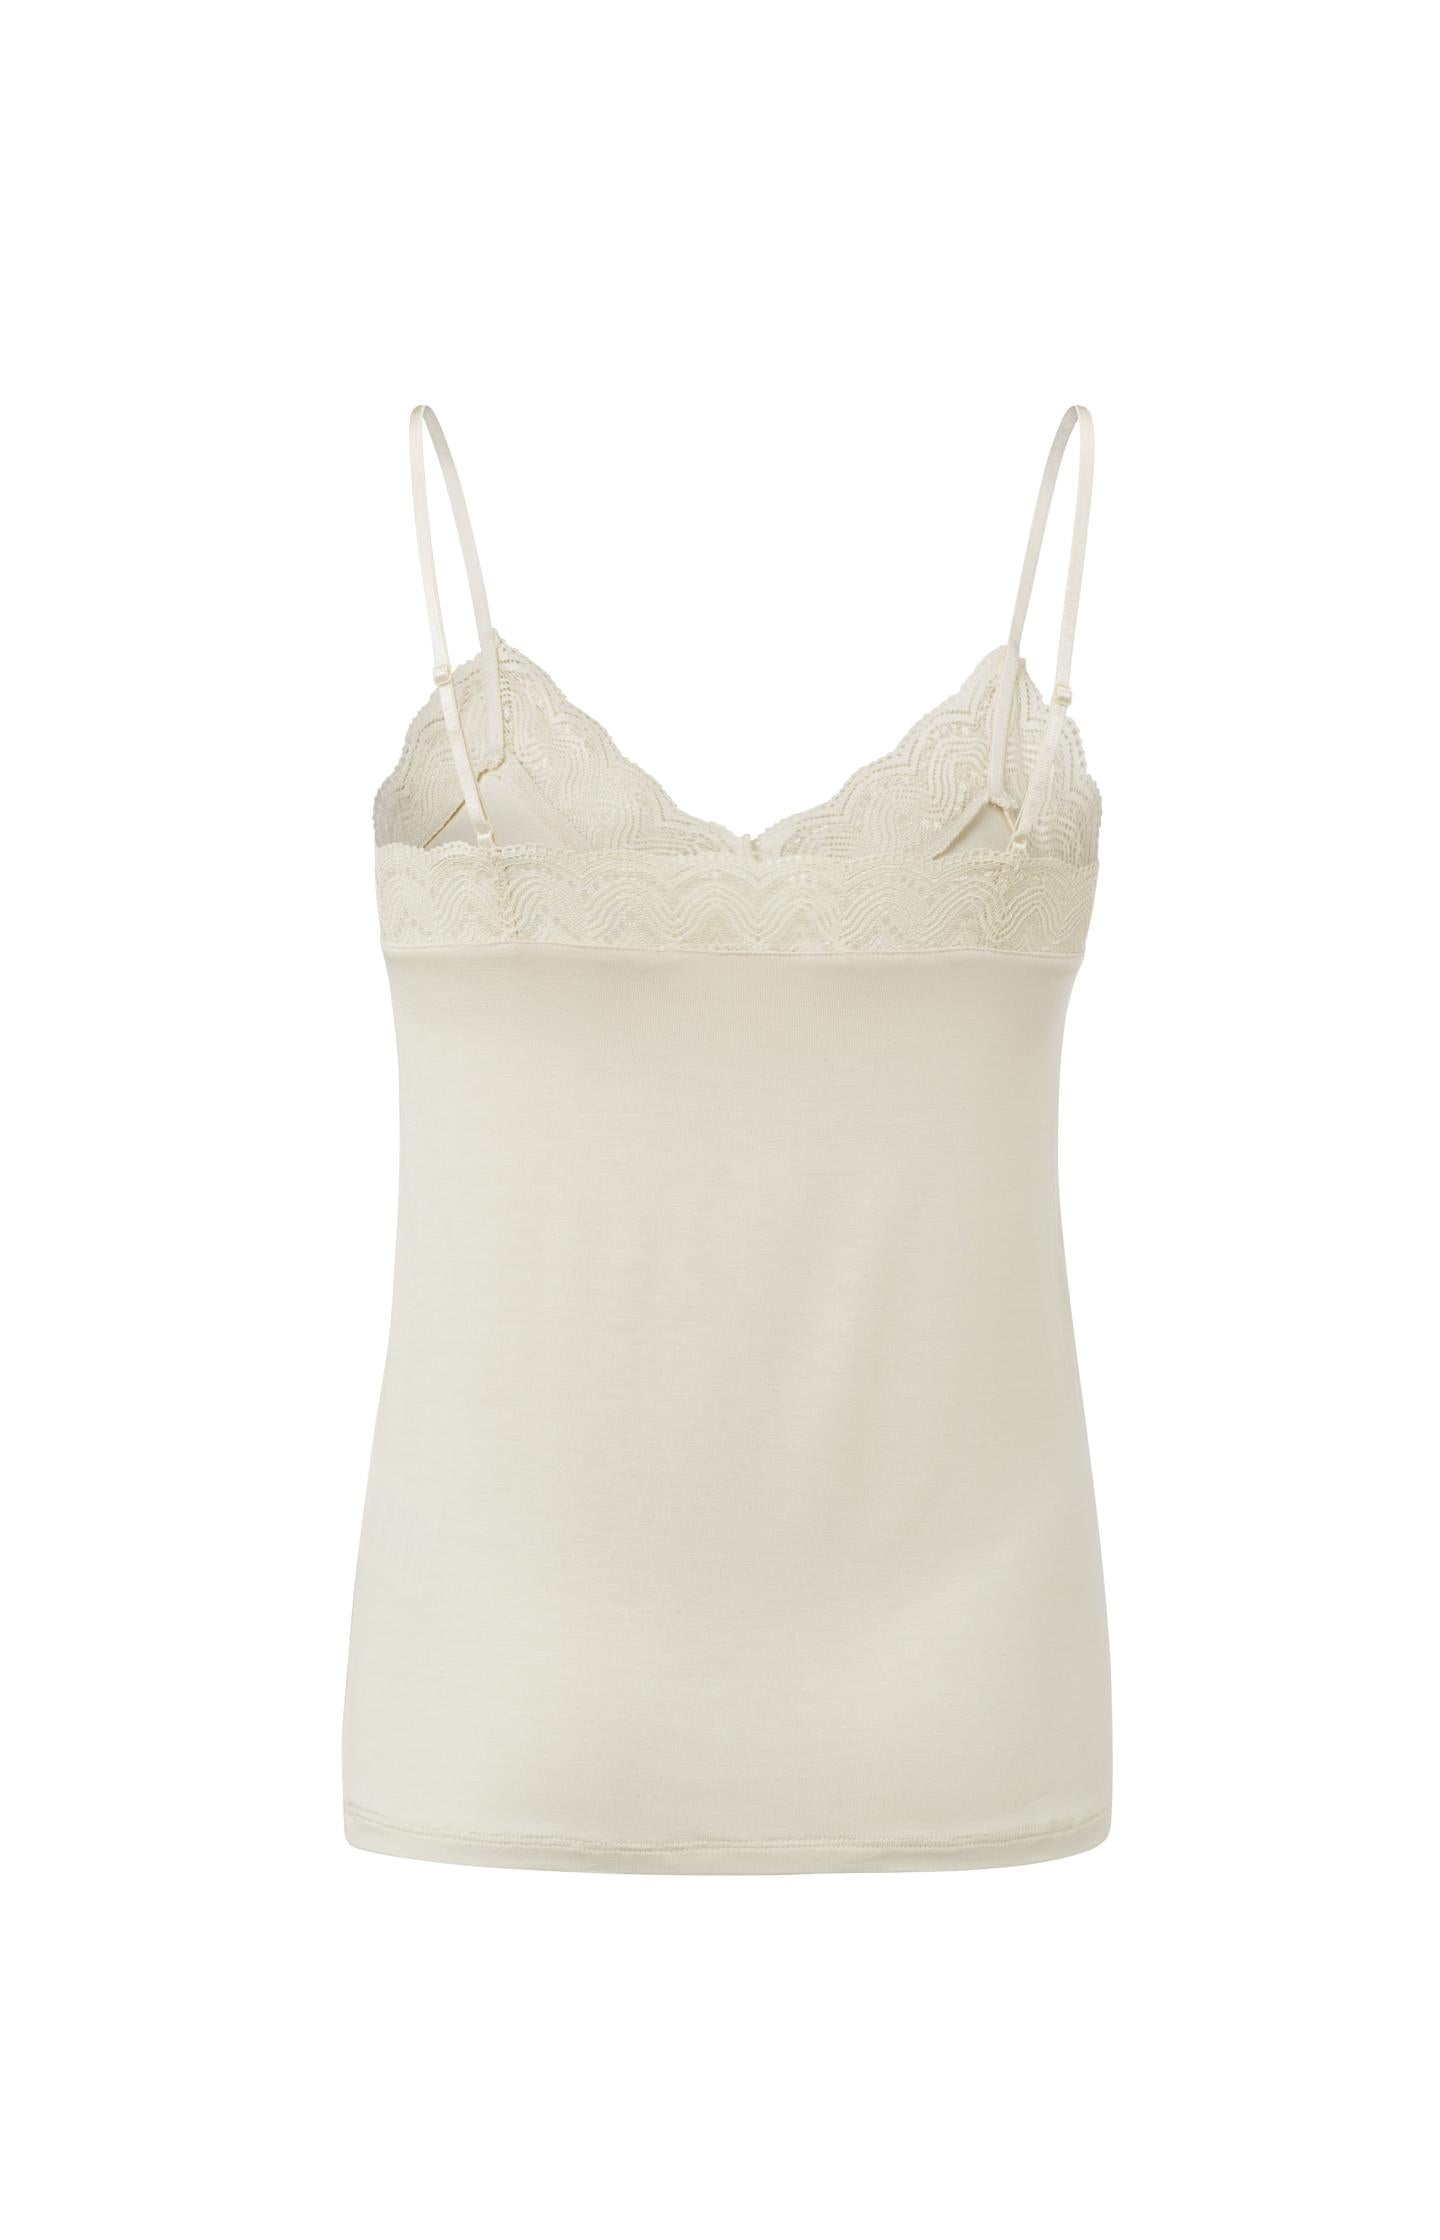 Strappy top with V-neck and lace details in slim fit